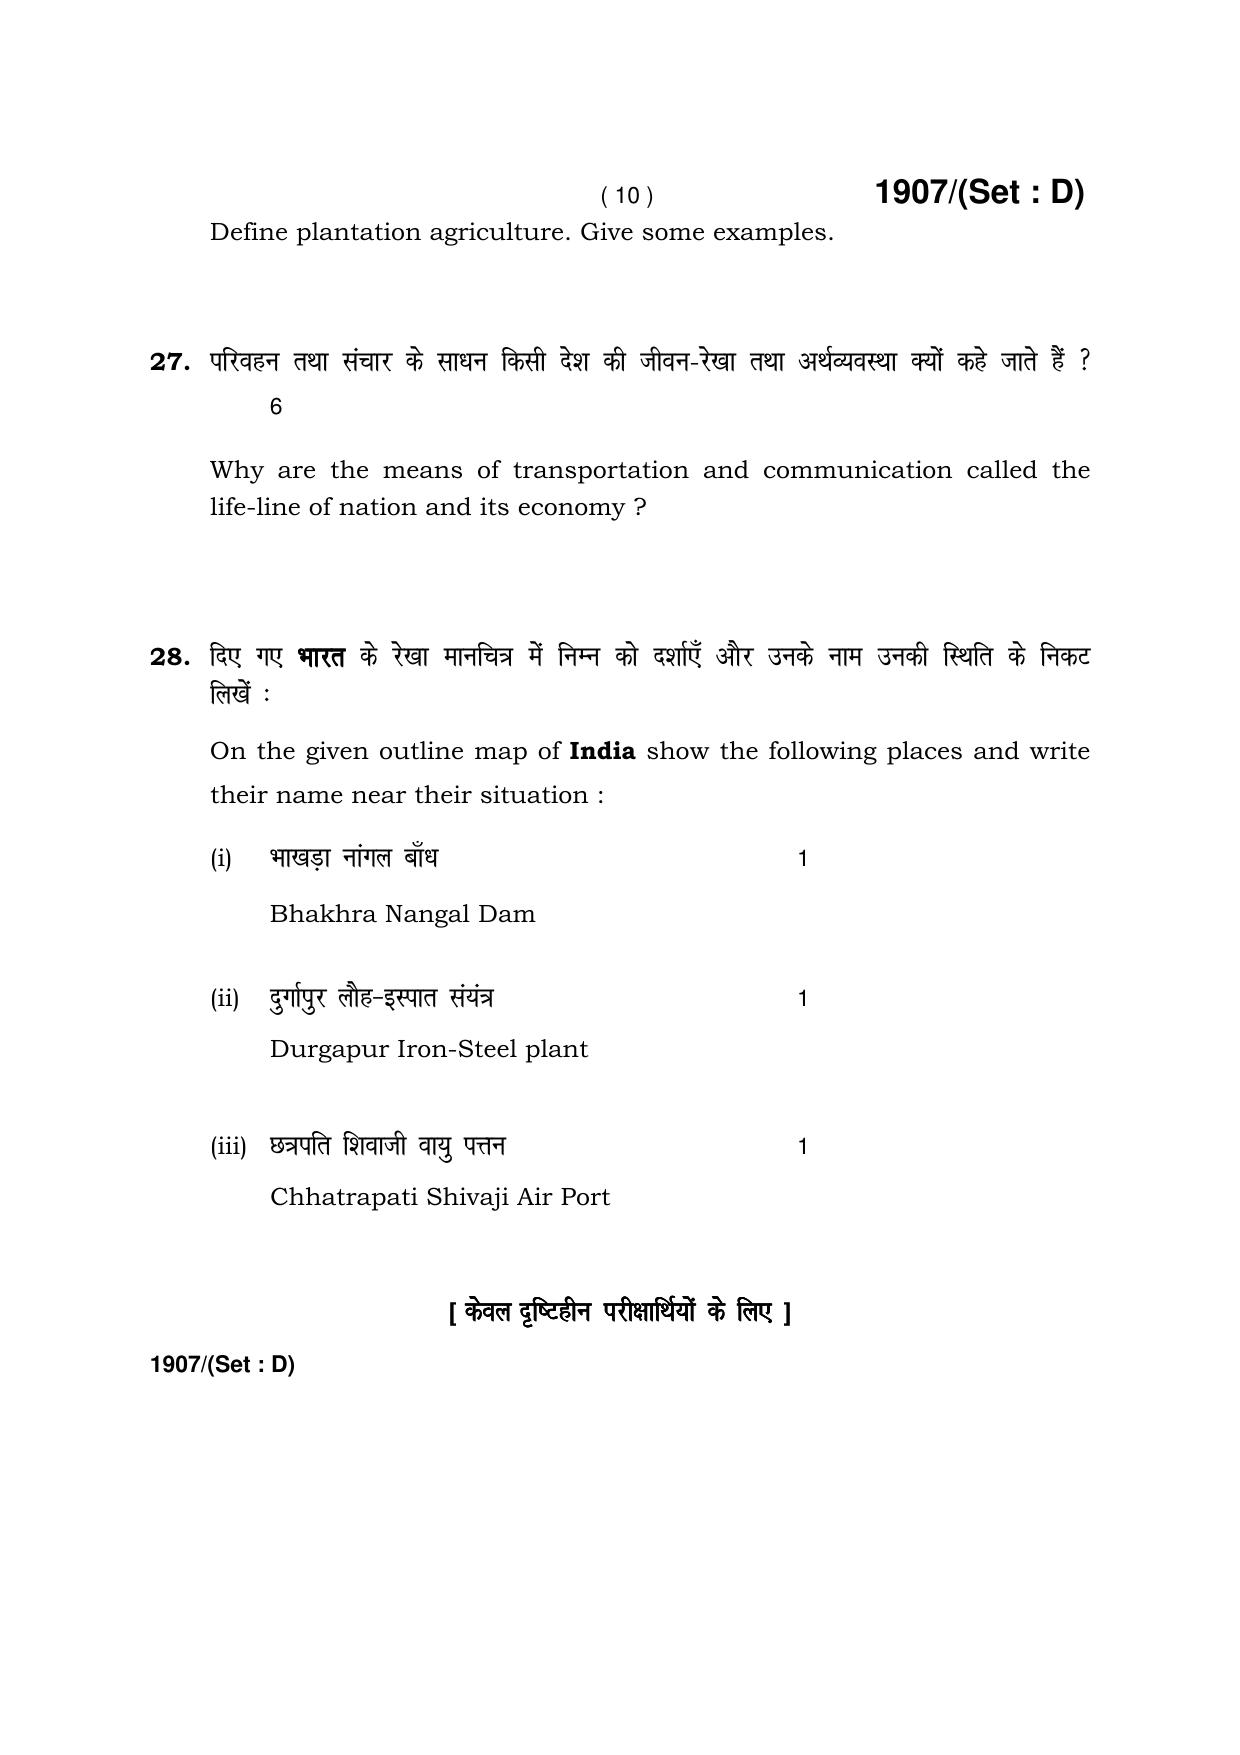 Haryana Board HBSE Class 10 Social Science -D 2017 Question Paper - Page 10